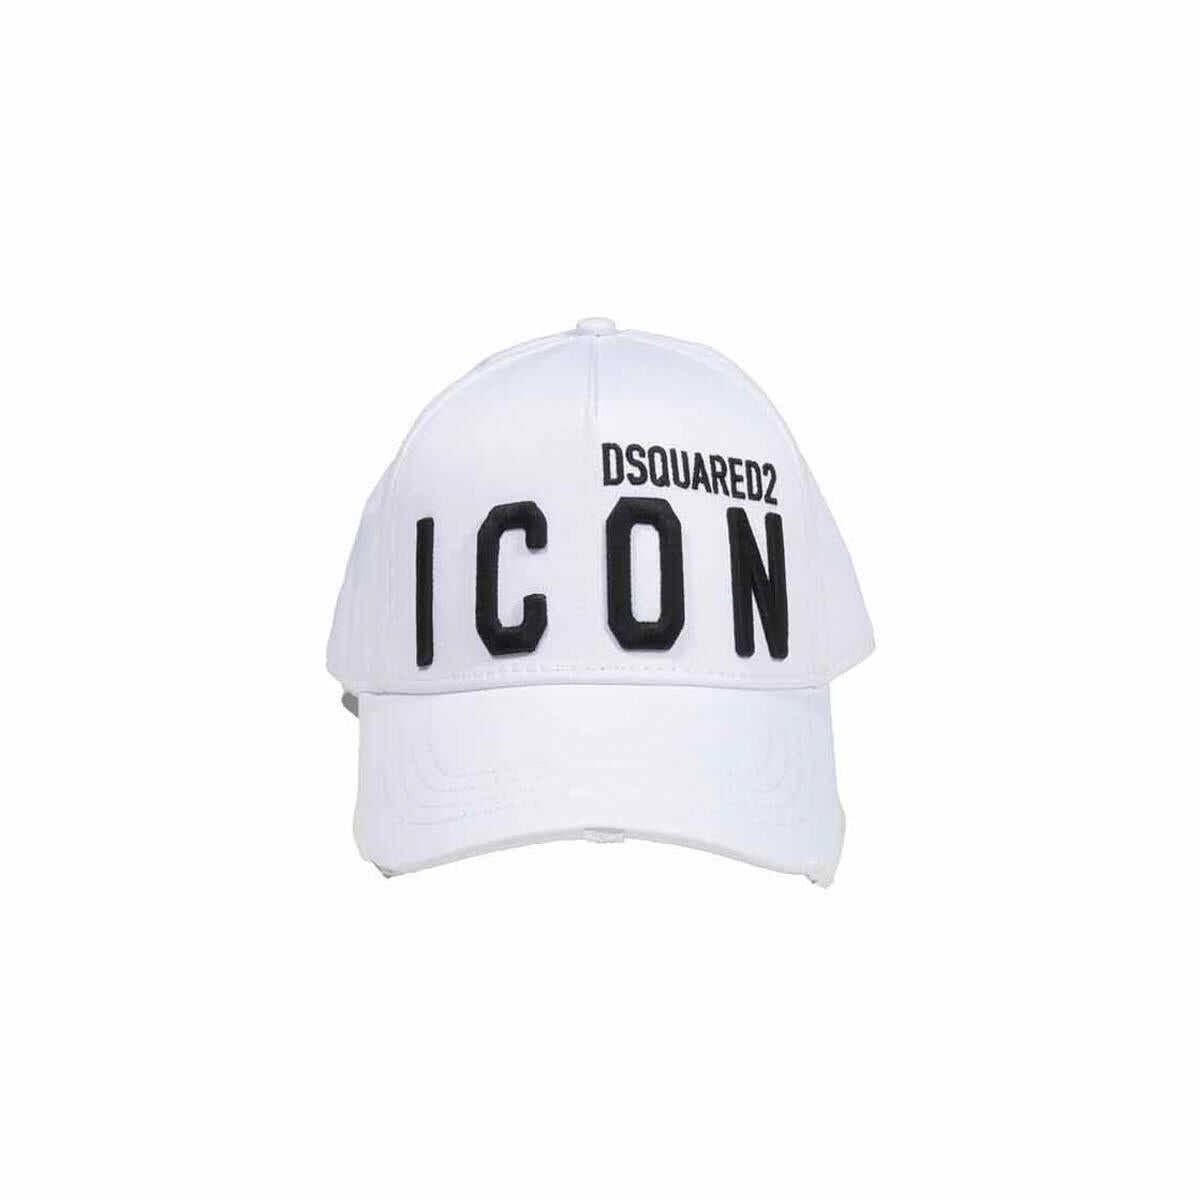 DSQUARED2 DSQUARED2 Black Icon embroidery hat with visor Dsquared2 WHITE